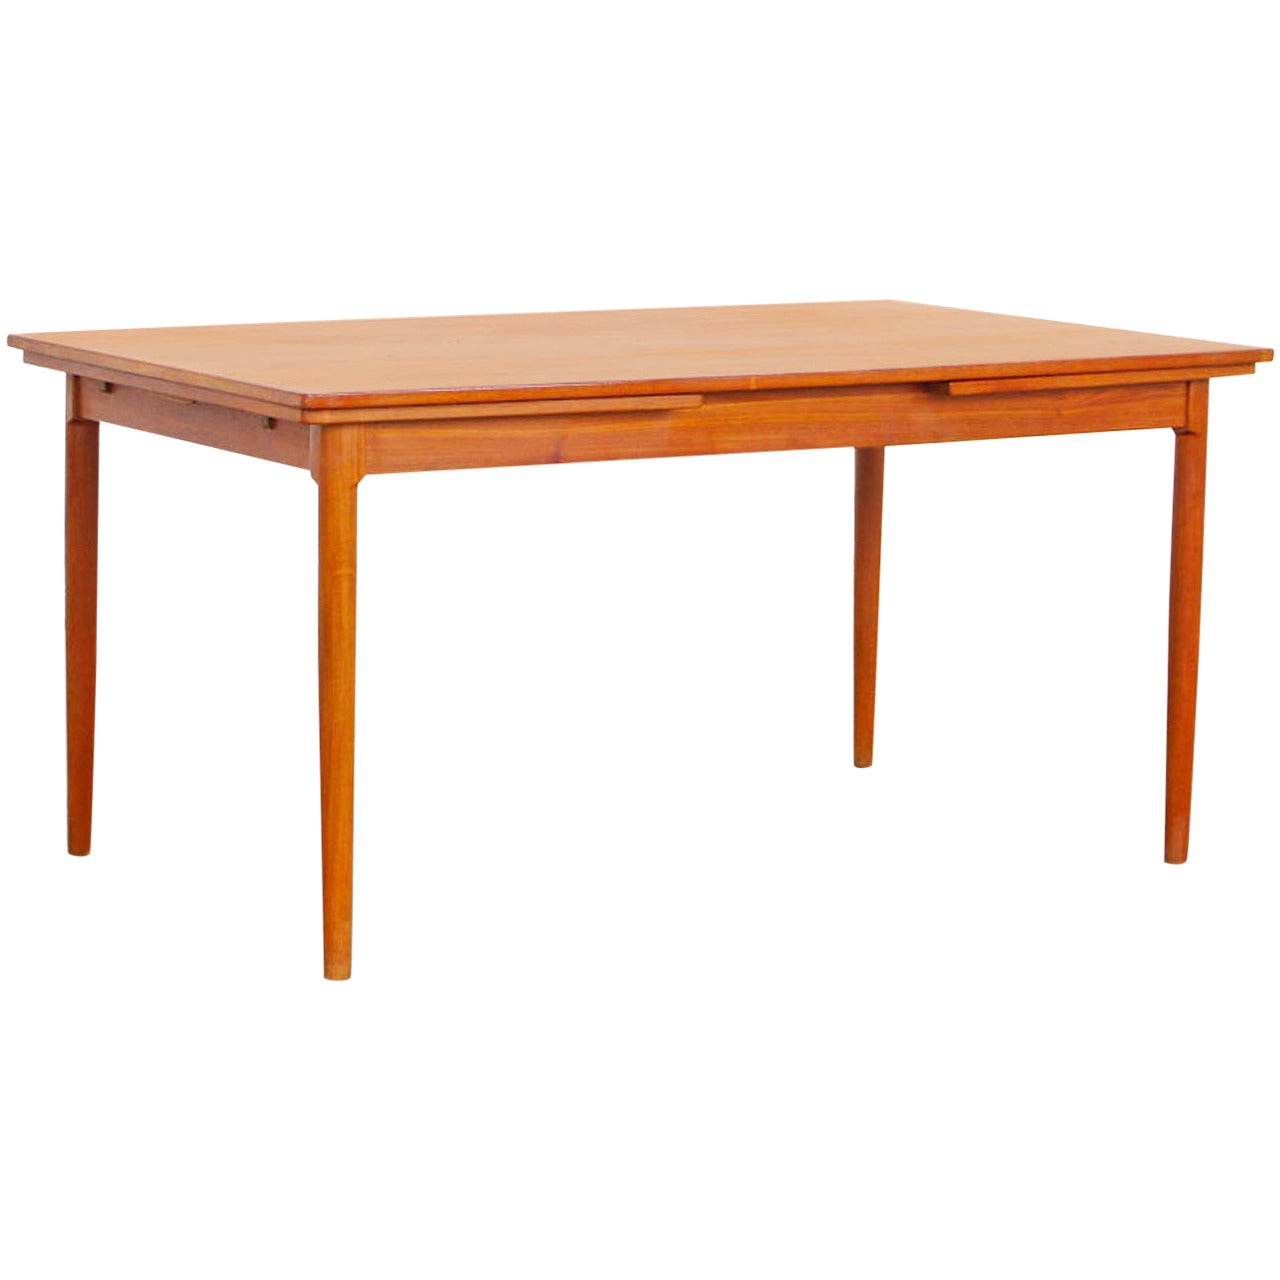 Expandable Teak Dining Table attr. to Harry Ostergaard